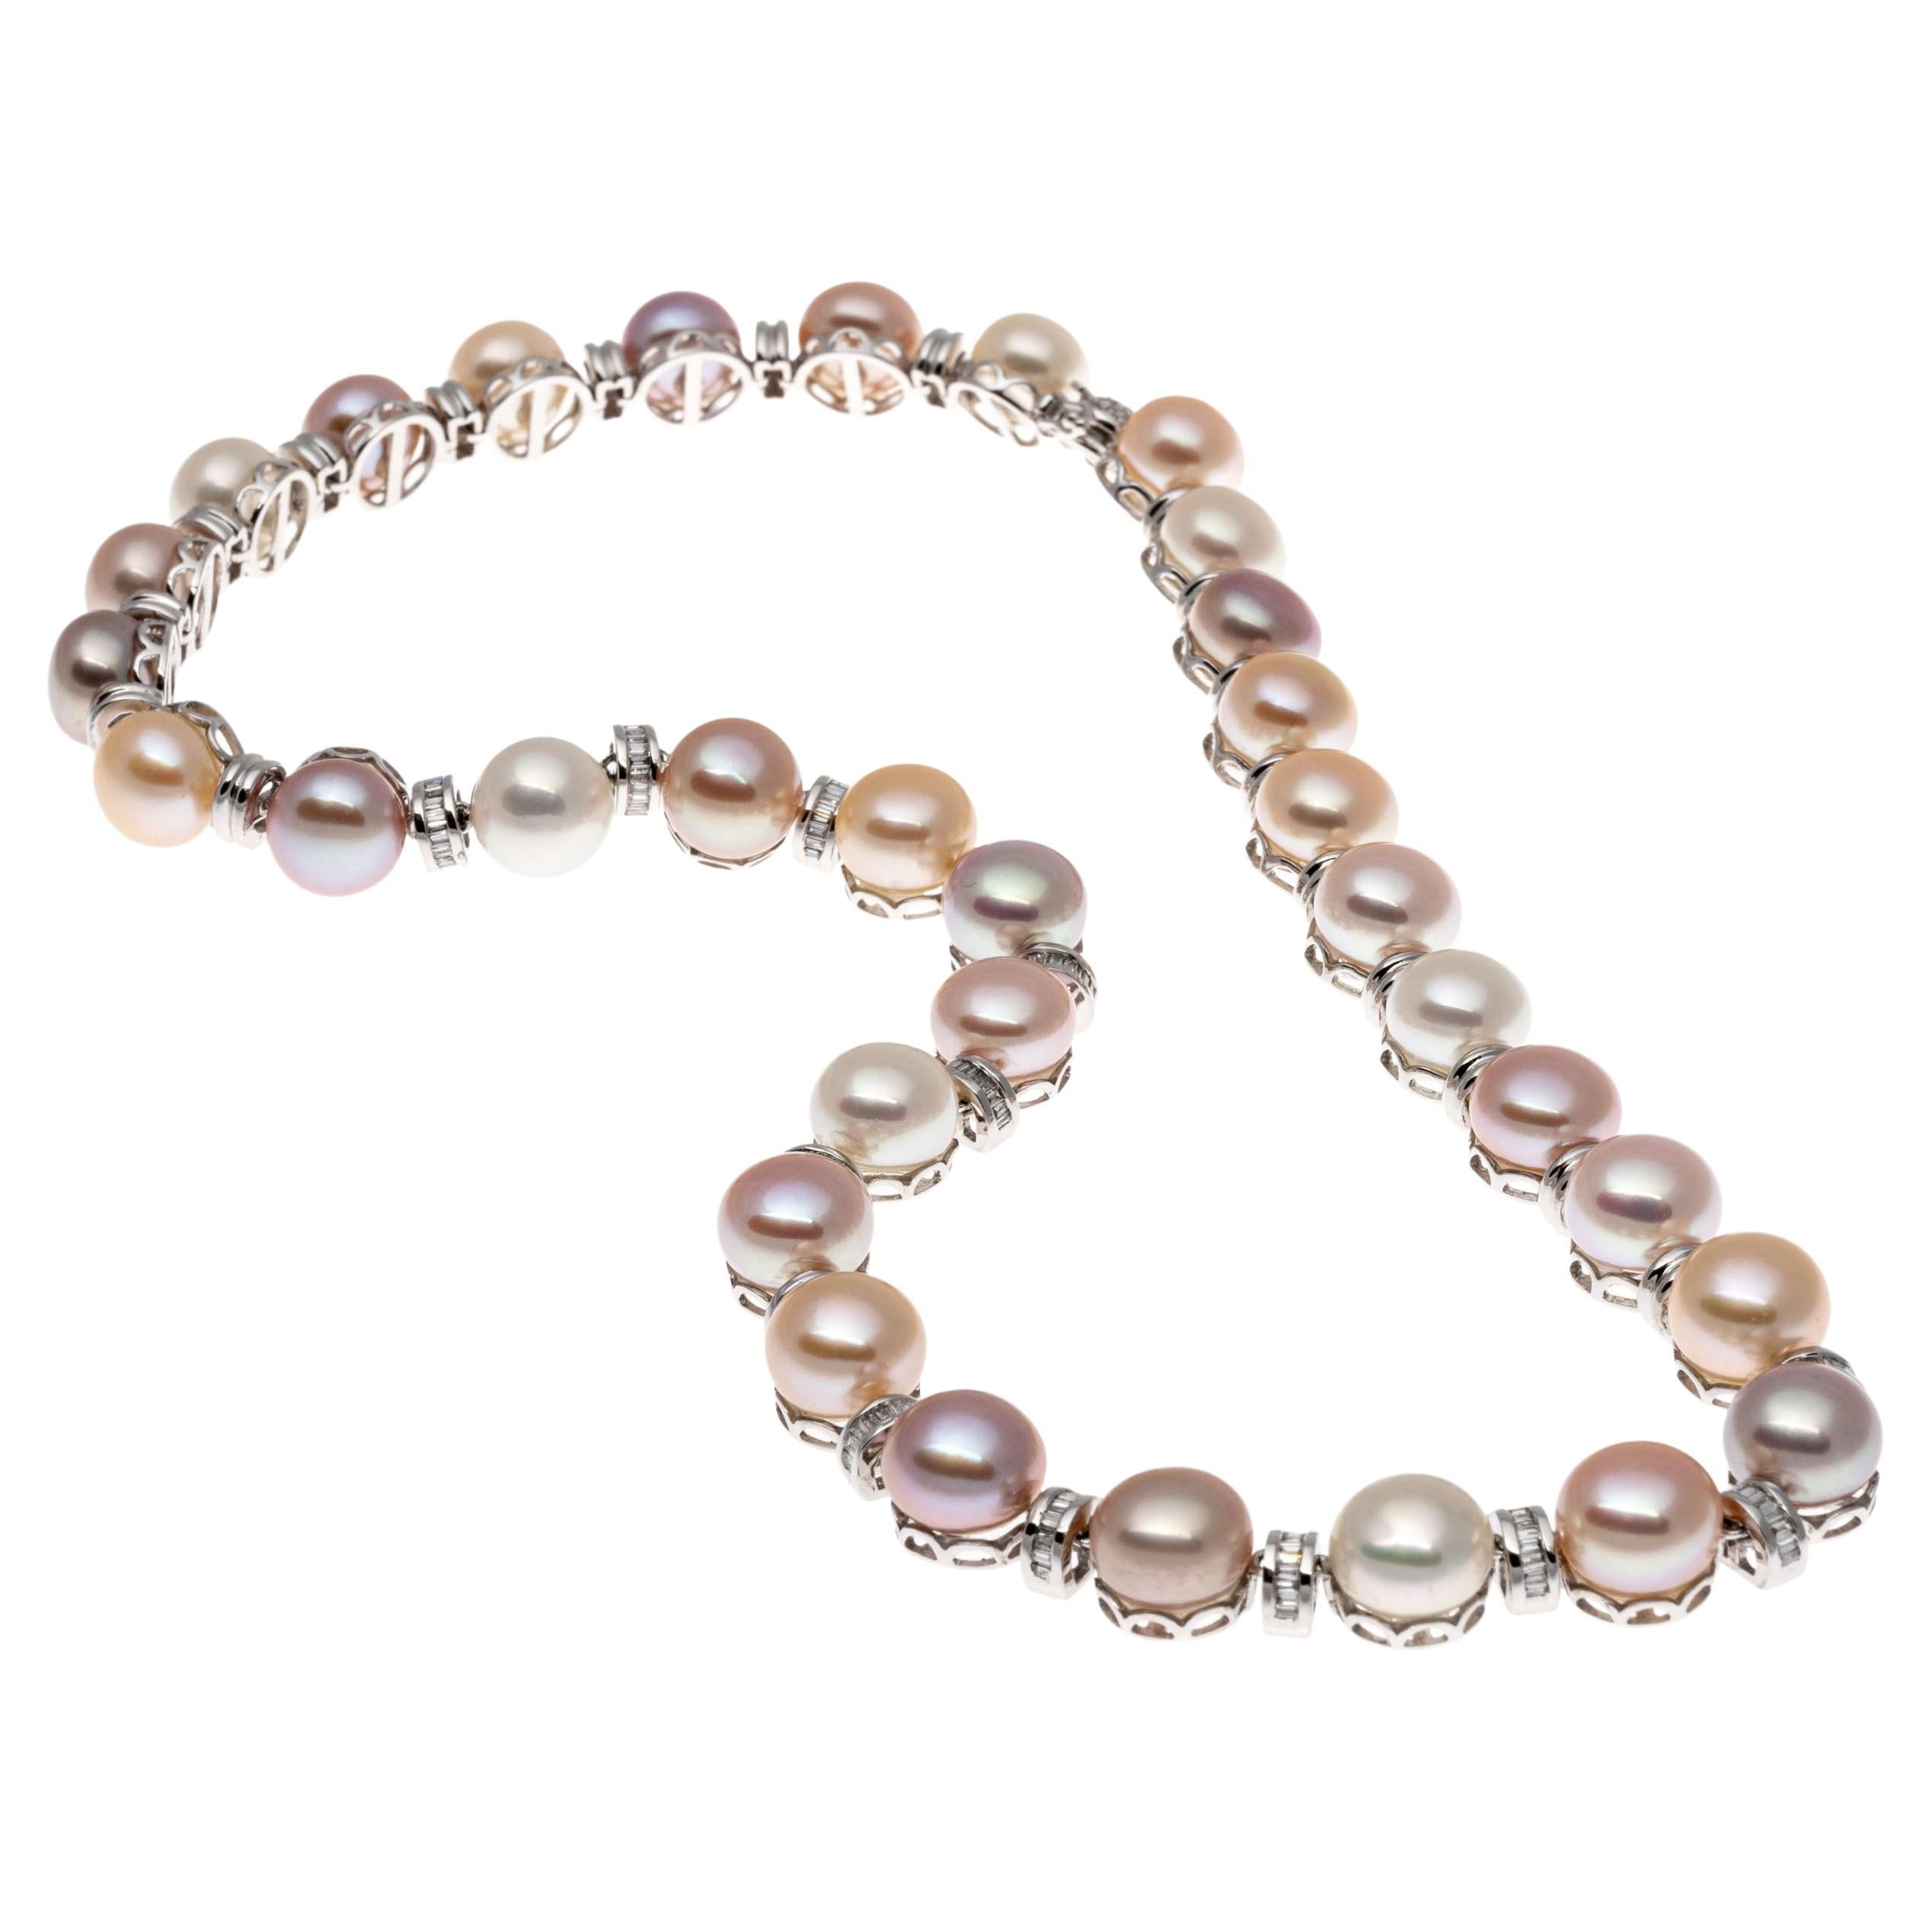 14k white gold necklace. This amazing necklace contains round, 9 mm to 9.25 mm cultured button pearls which are arrayed in a multitude of tones - pinkish white, purple, champagne, gold, rose, taupe - that alternate with half rondelle shaped links,